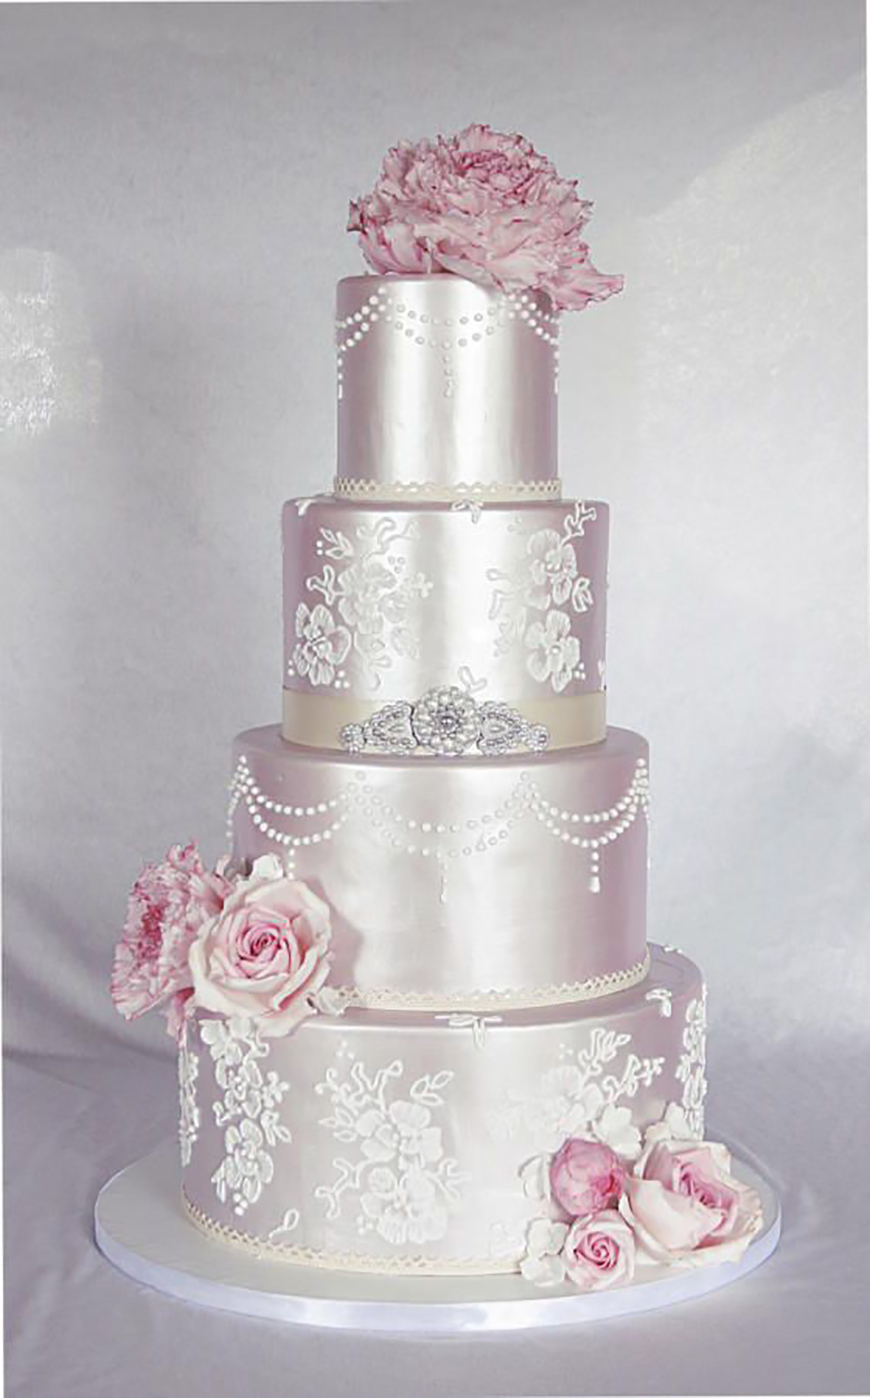 22 Wedding Cakes Fit for a Fairy Tale - Pretty in pink | CHWV